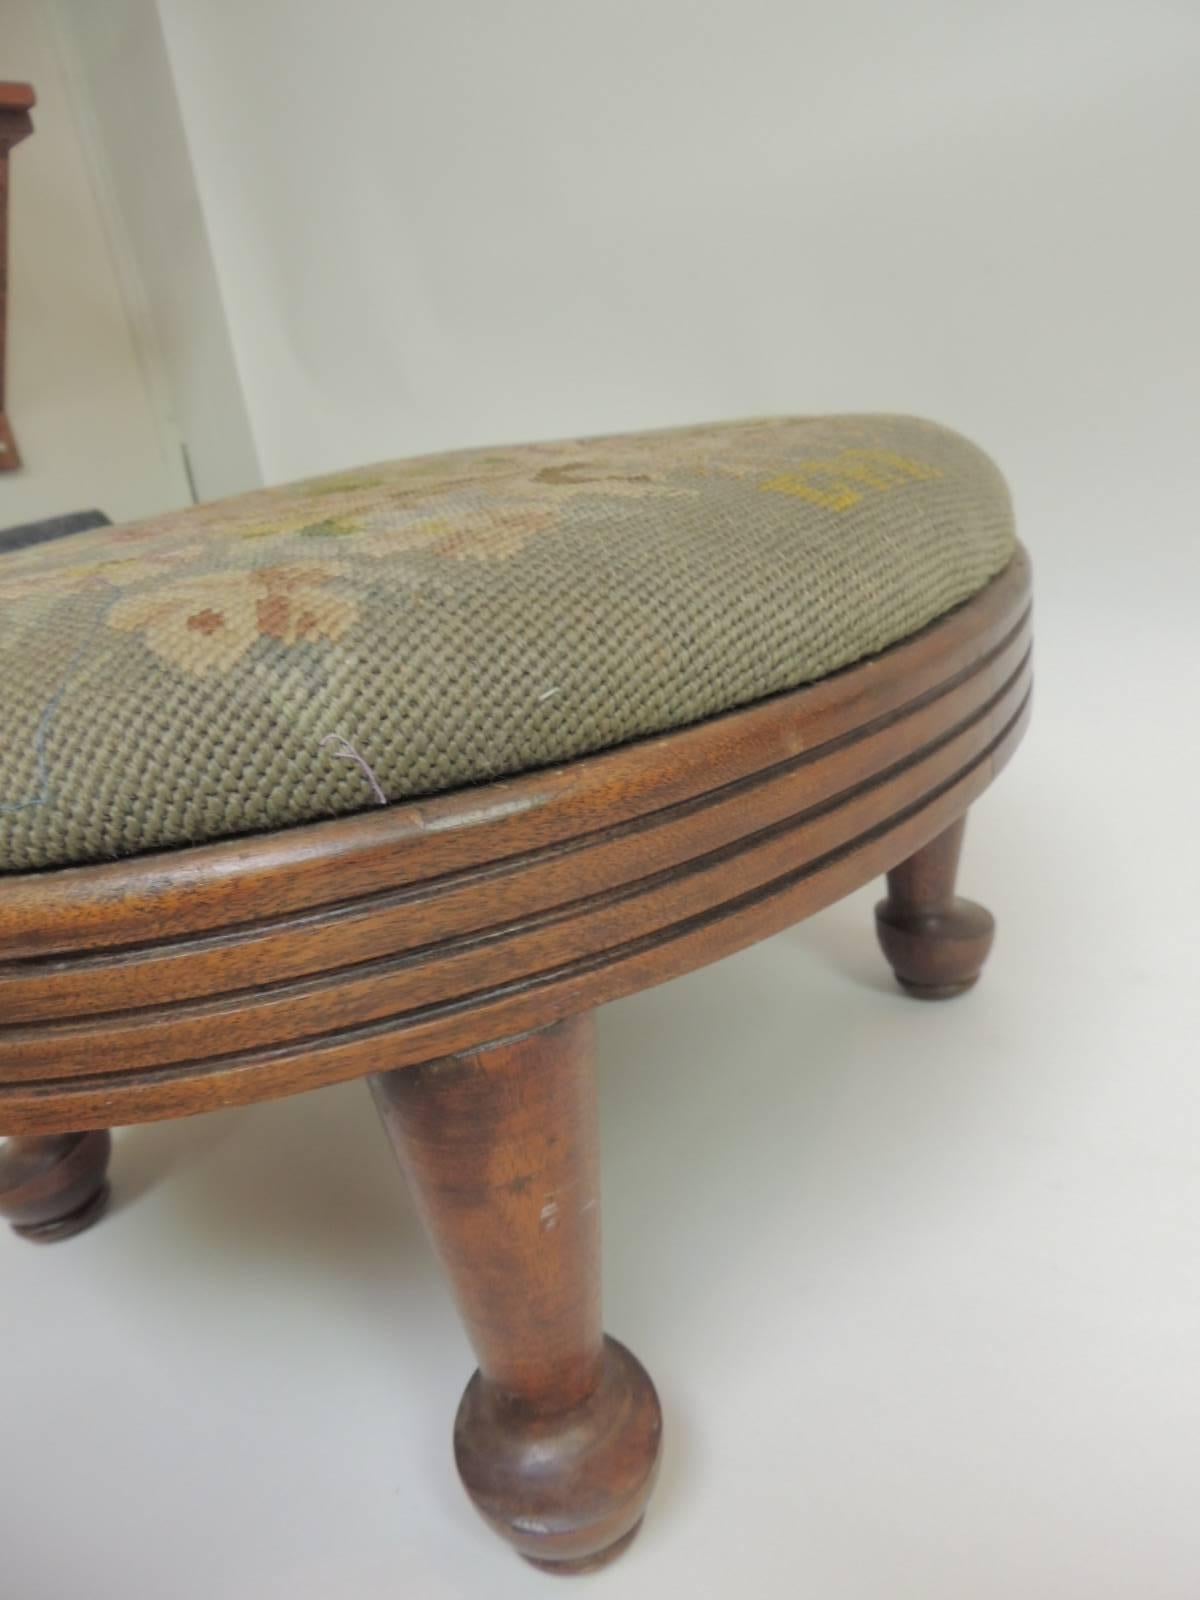 European Vintage Oval Footstool with Floral Tapestry Upholstery